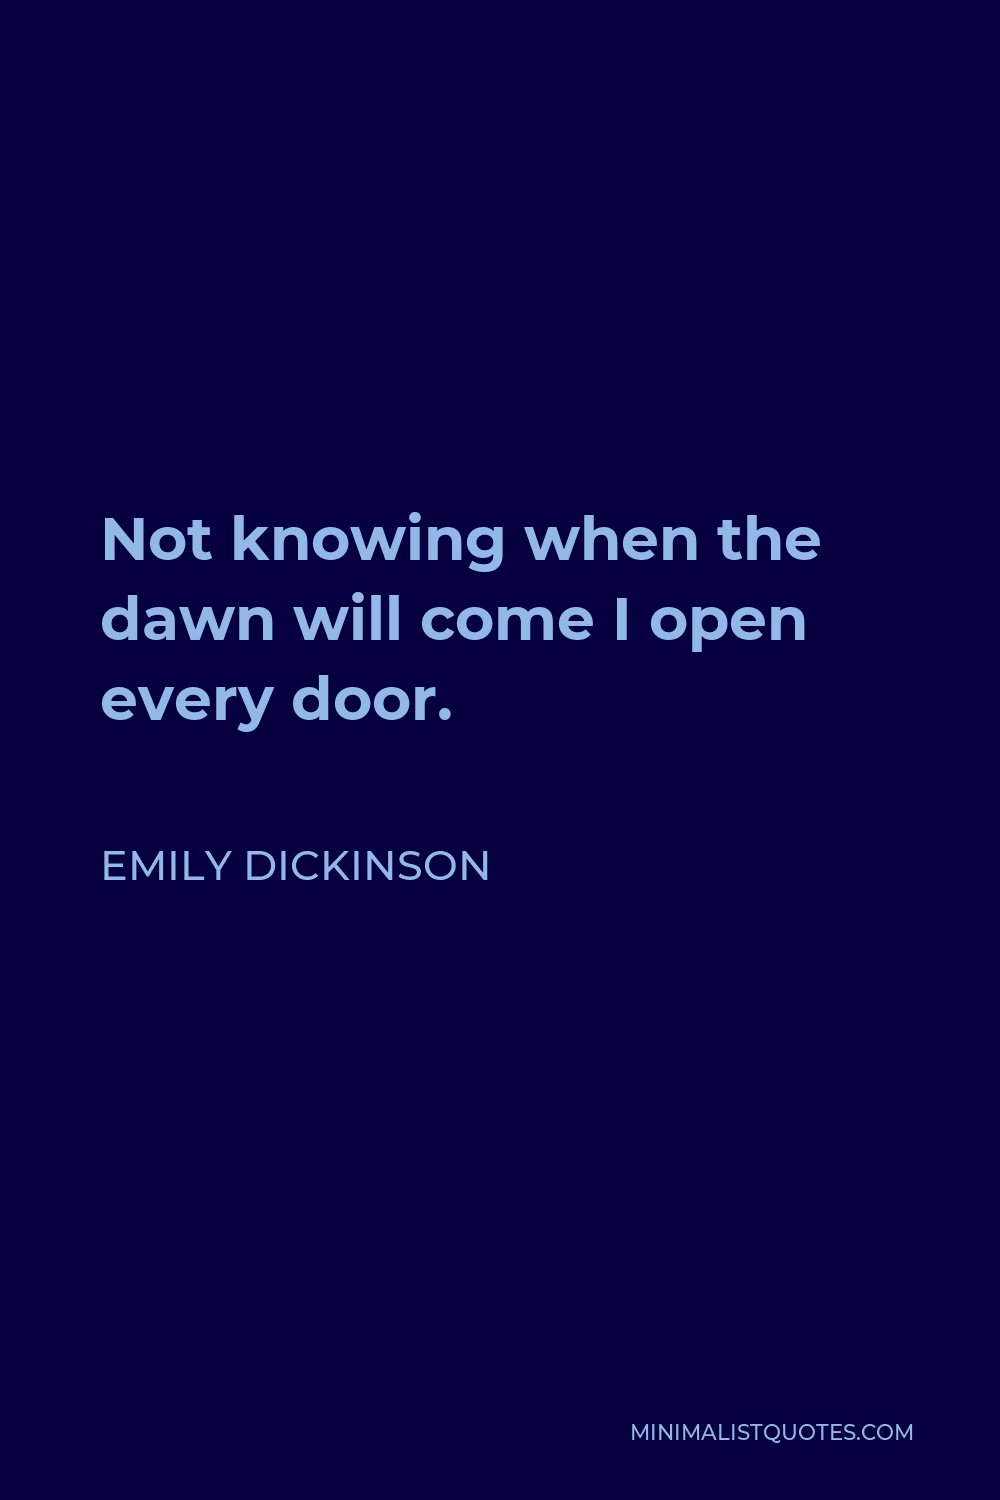 Emily Dickinson Quote: Not knowing when the dawn will come I open every ...